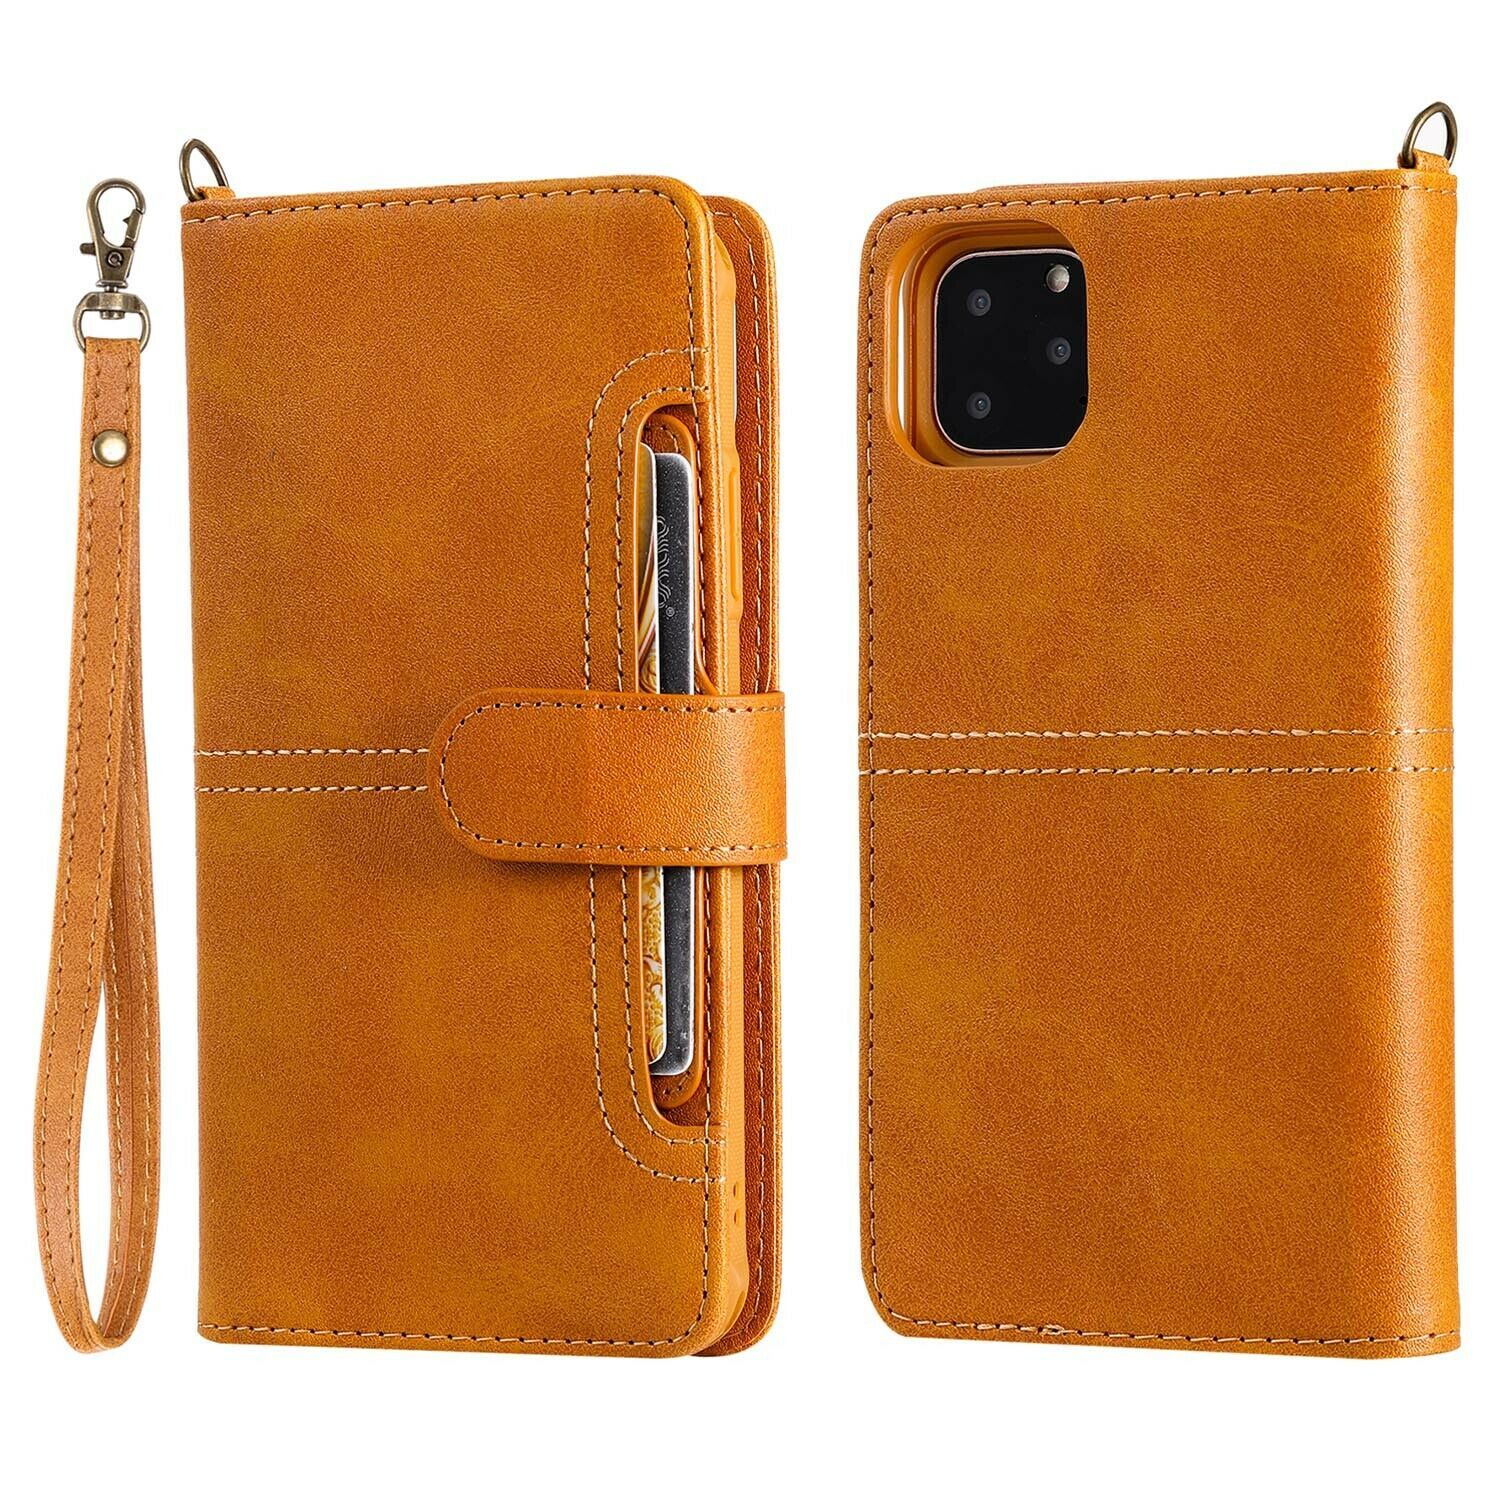 Primary image for k4) Leather Wallet Magnetic flip back COVER For Samsung Galaxy S20 S20+ 20 ultra